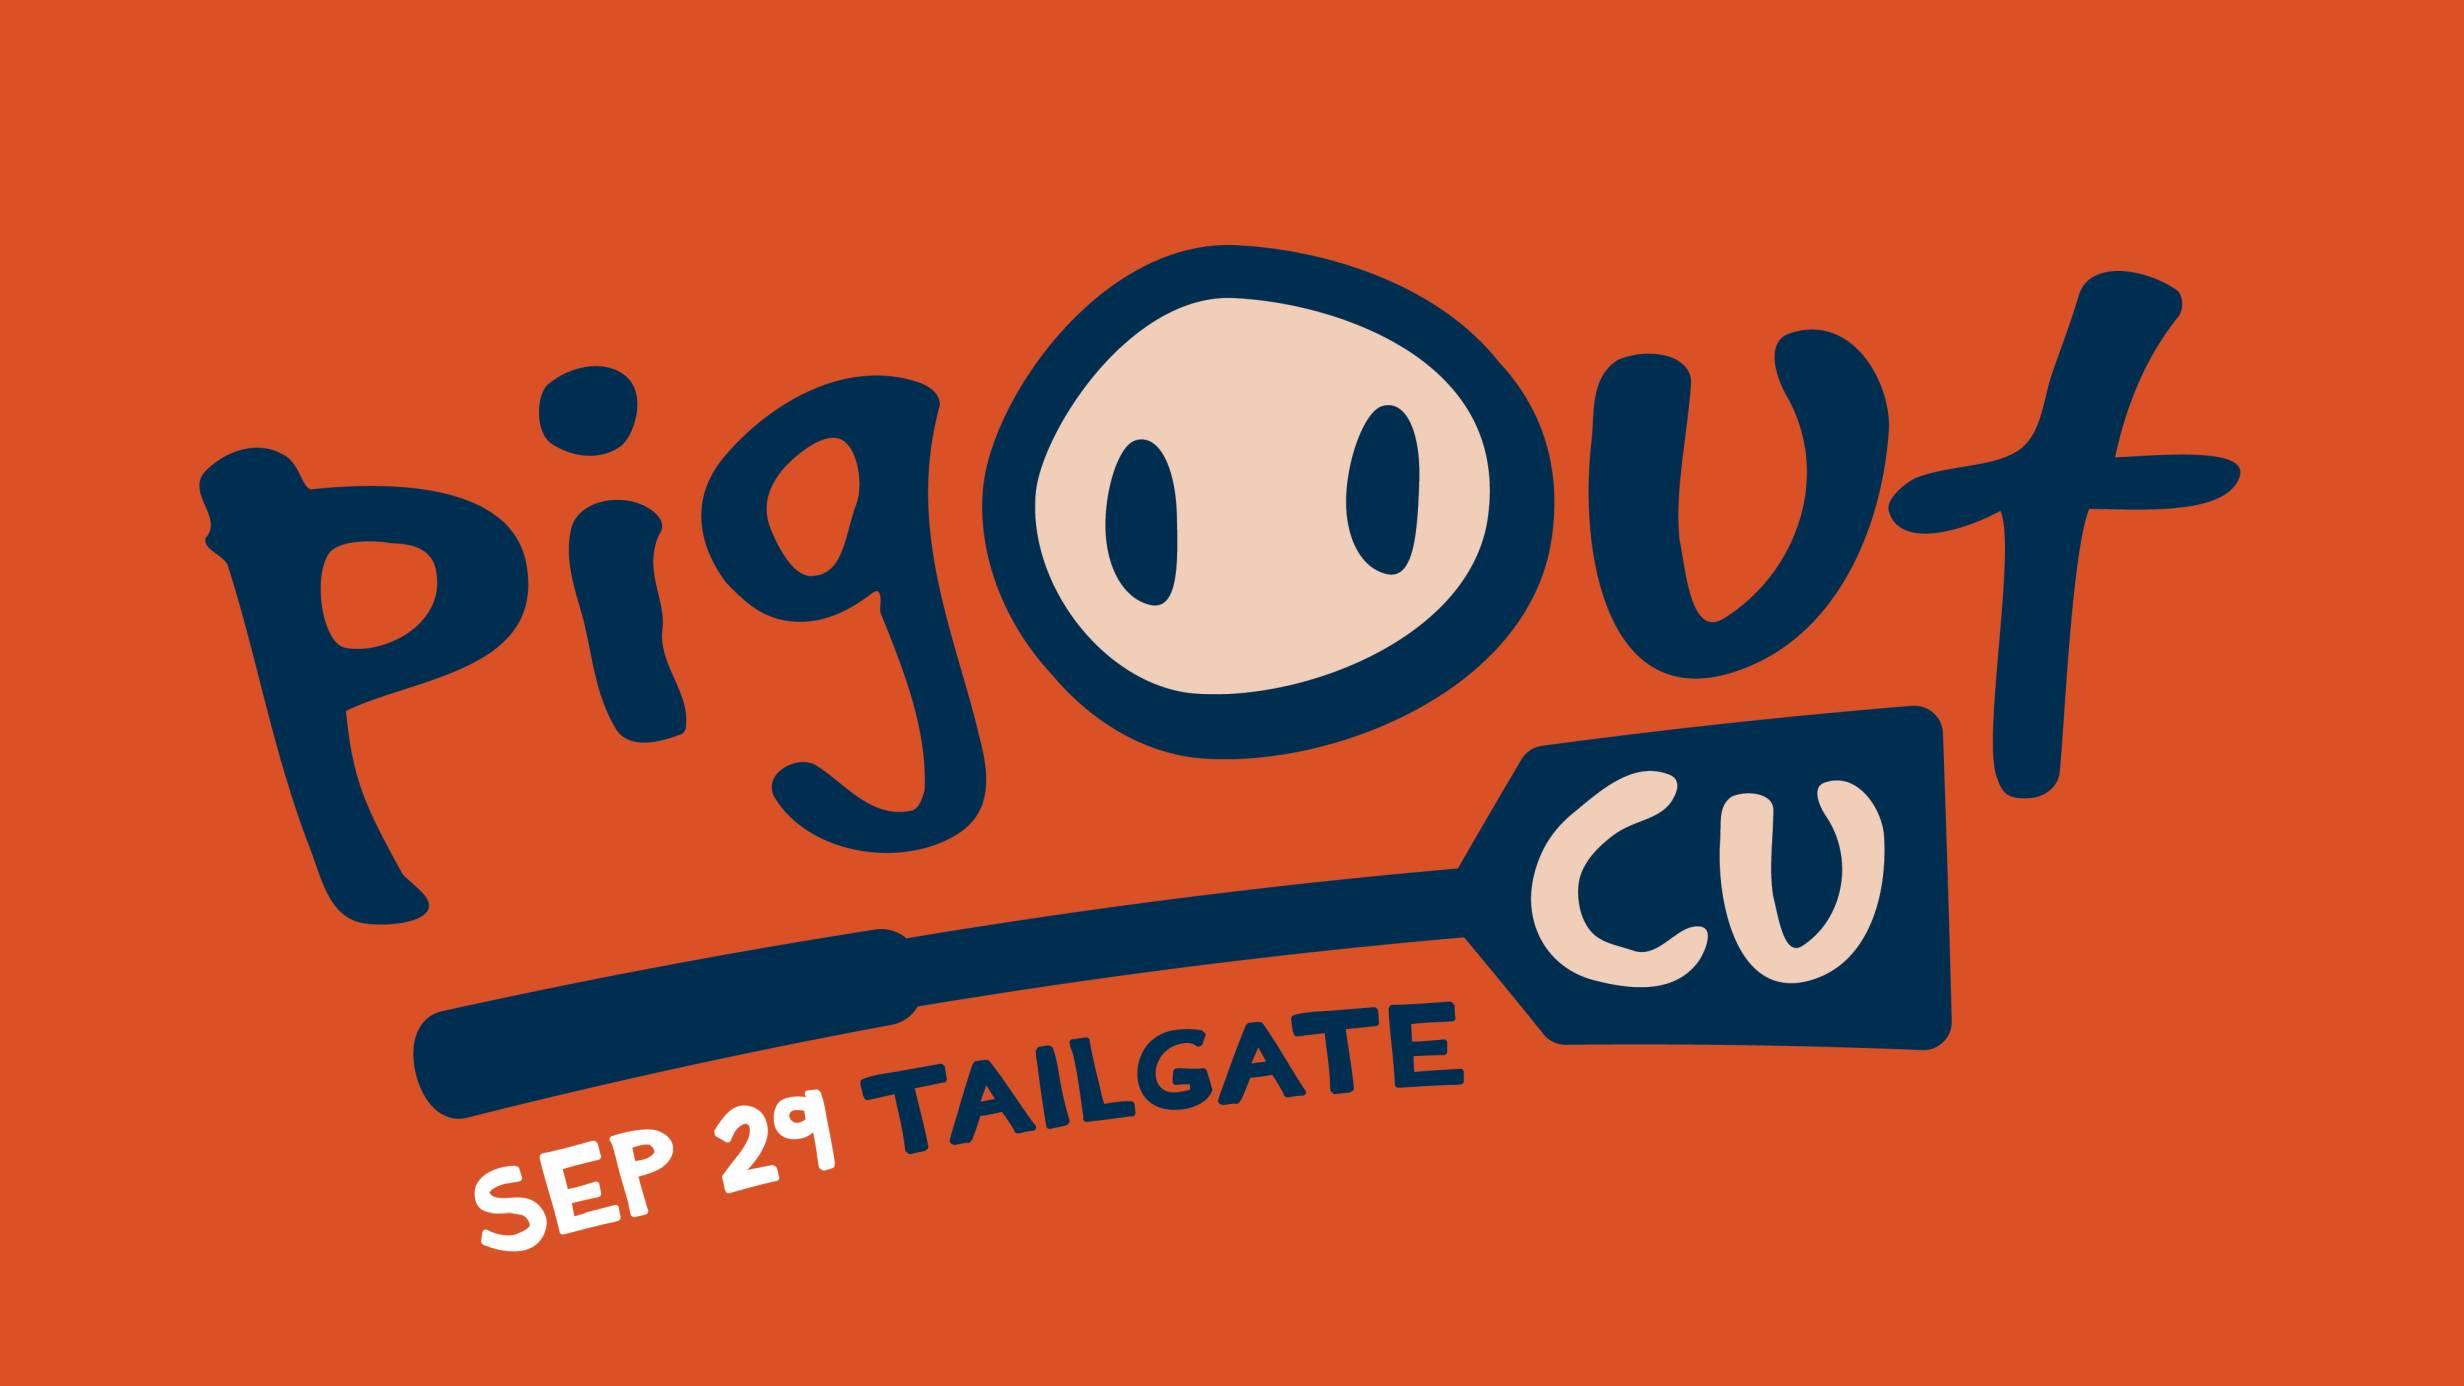 Pig Out C-U charity cookoff taking place September 29th